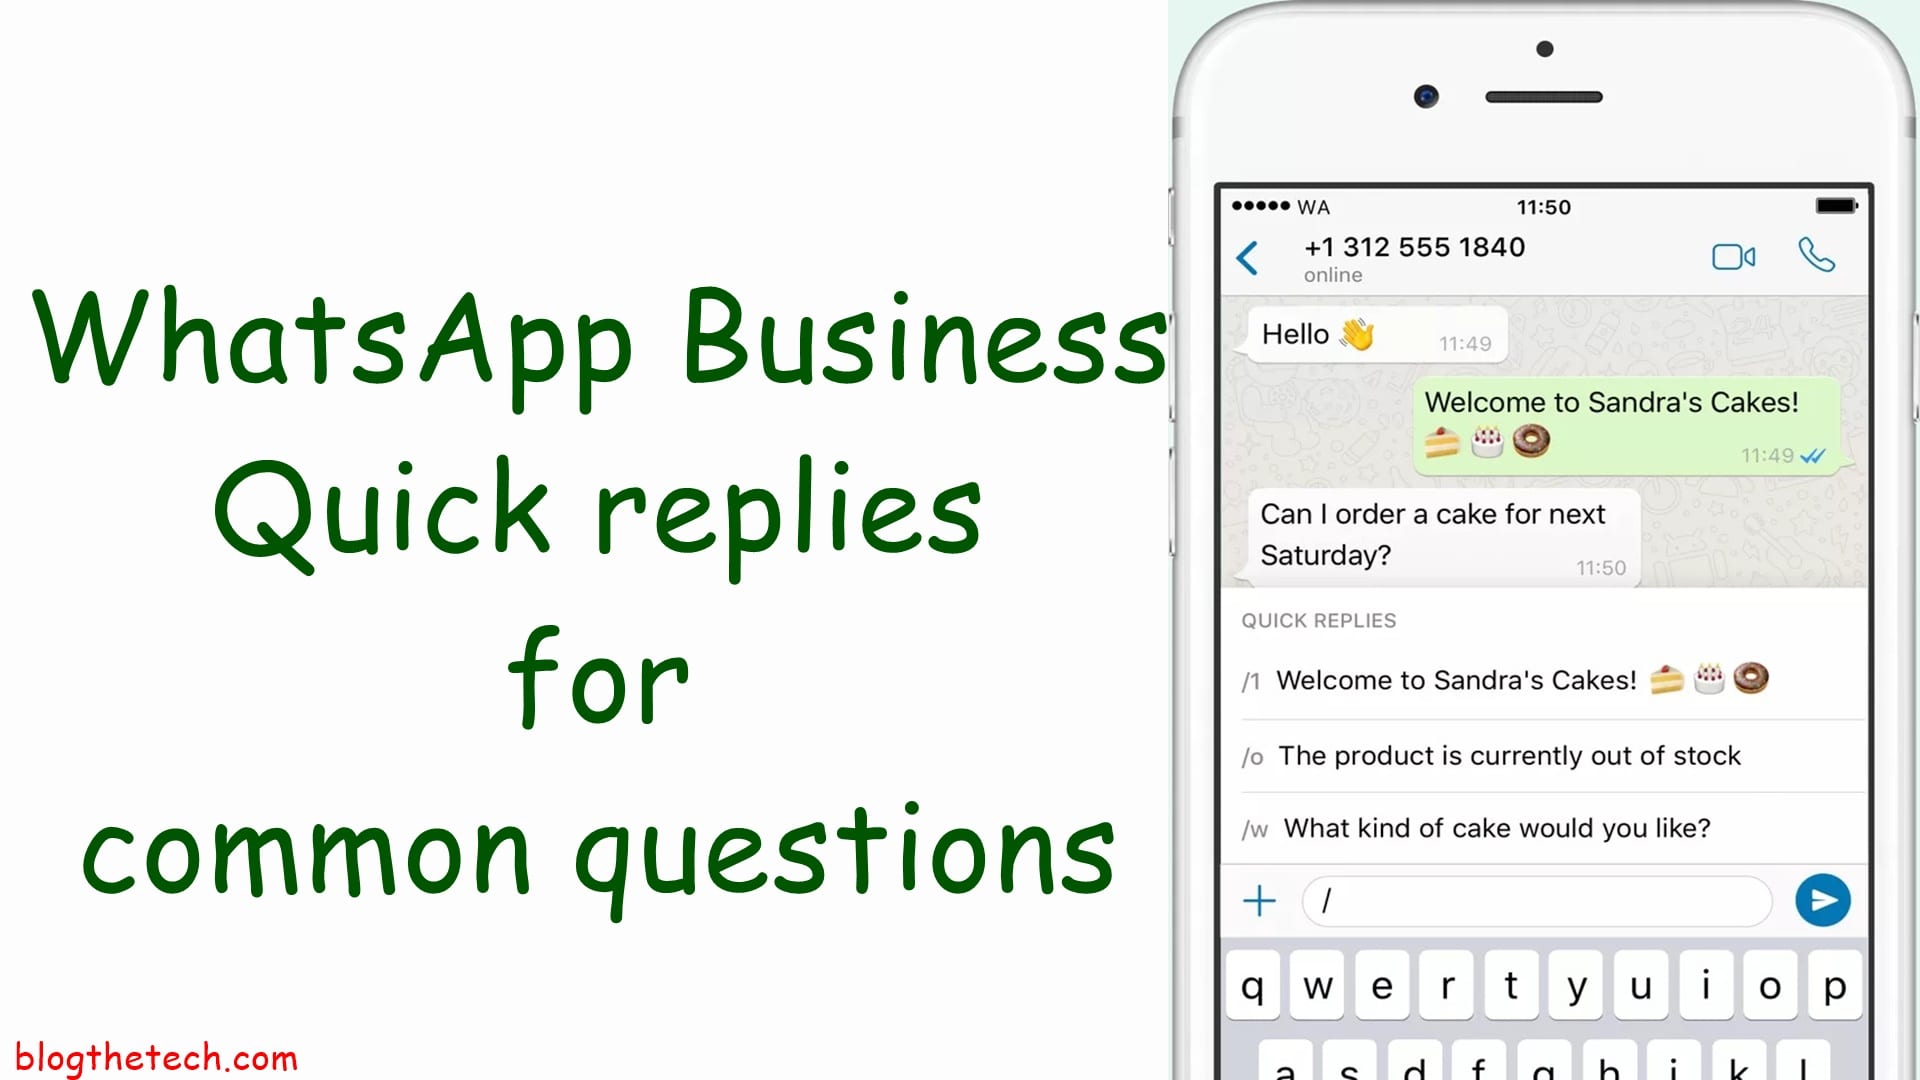 WhatsApp Business Quick replies for common questions